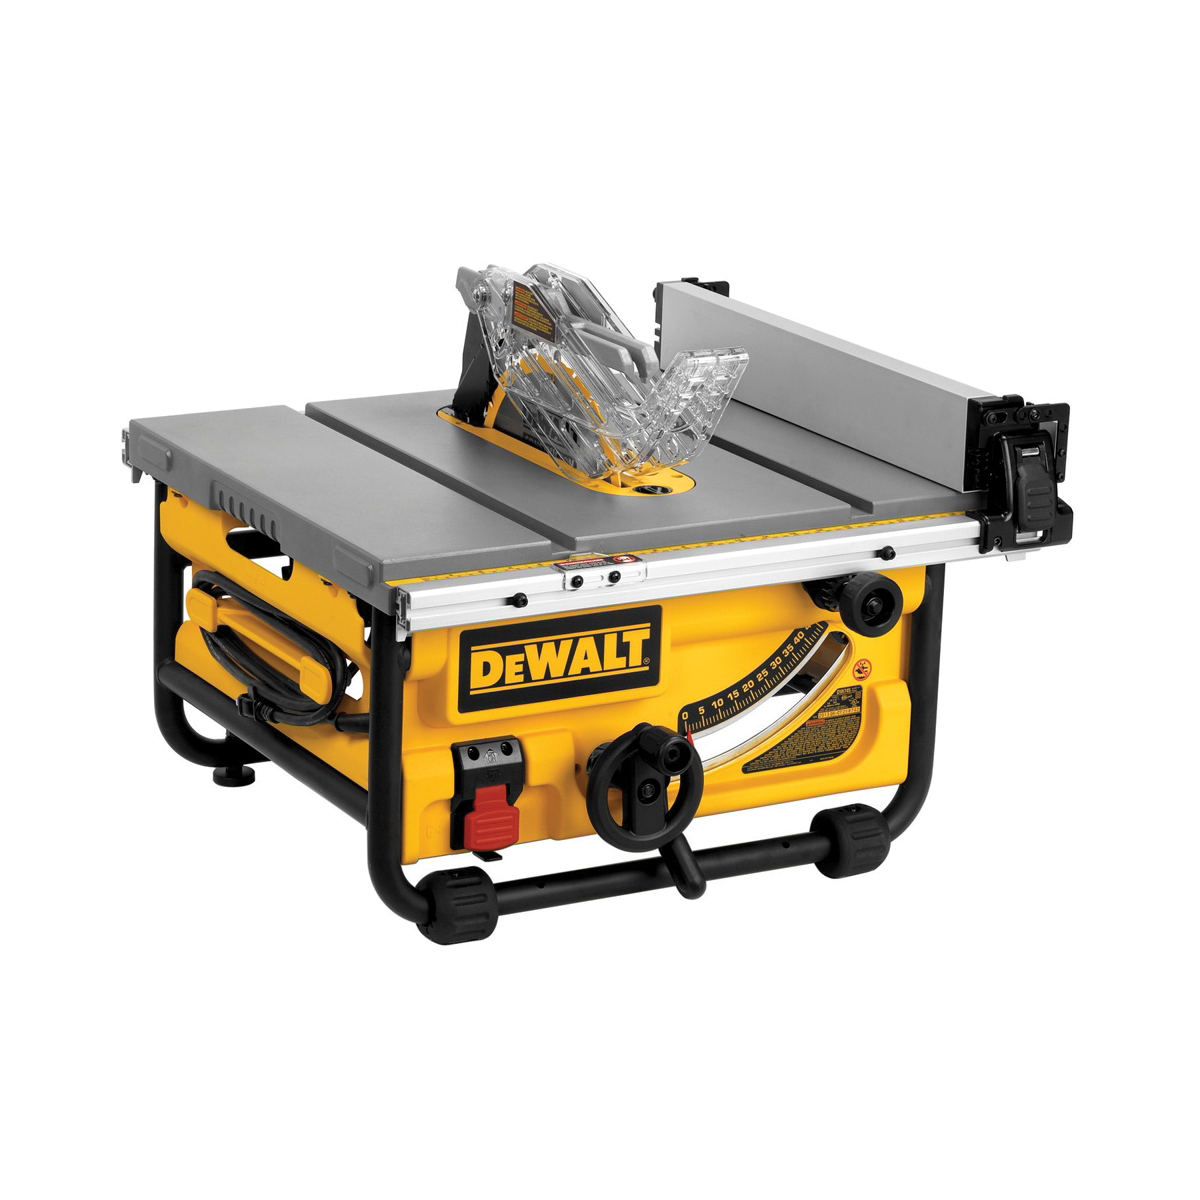 DeWALT® DWE7480 Compact Jobsite Table Saw With Site-Pro Modular Guarding System, 10 in Dia Blade, 5/8 in Arbor/Shank, 3-1/8 in 90 deg Capacity, 2 hp, Tool Only